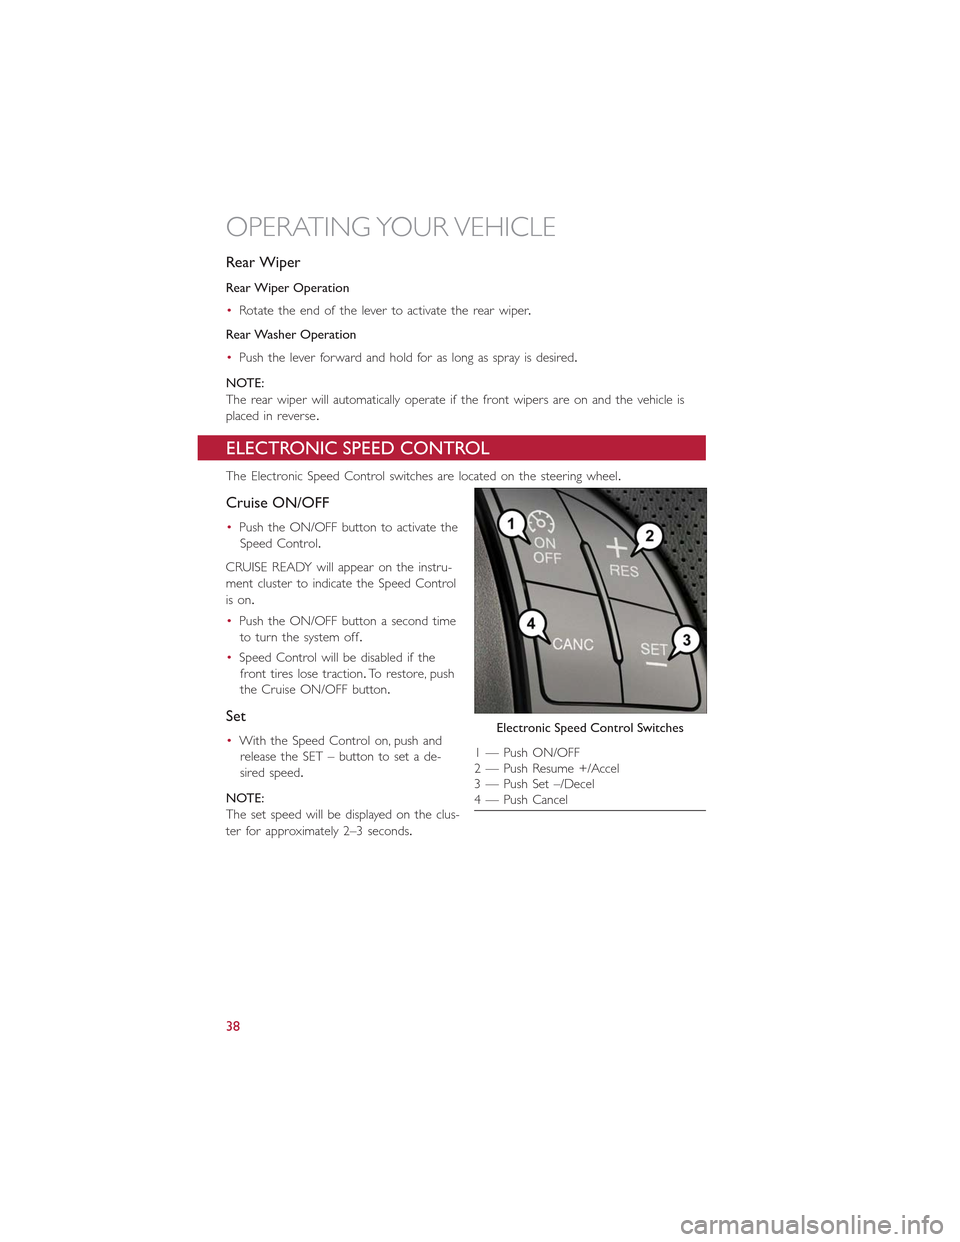 FIAT 500E 2015 2.G User Guide Rear Wiper
Rear Wiper Operation
•Rotate the end of the lever to activate the rear wiper.
Rear Washer Operation
•Push the lever forward and hold for as long as spray is desired.
NOTE:
The rear wipe